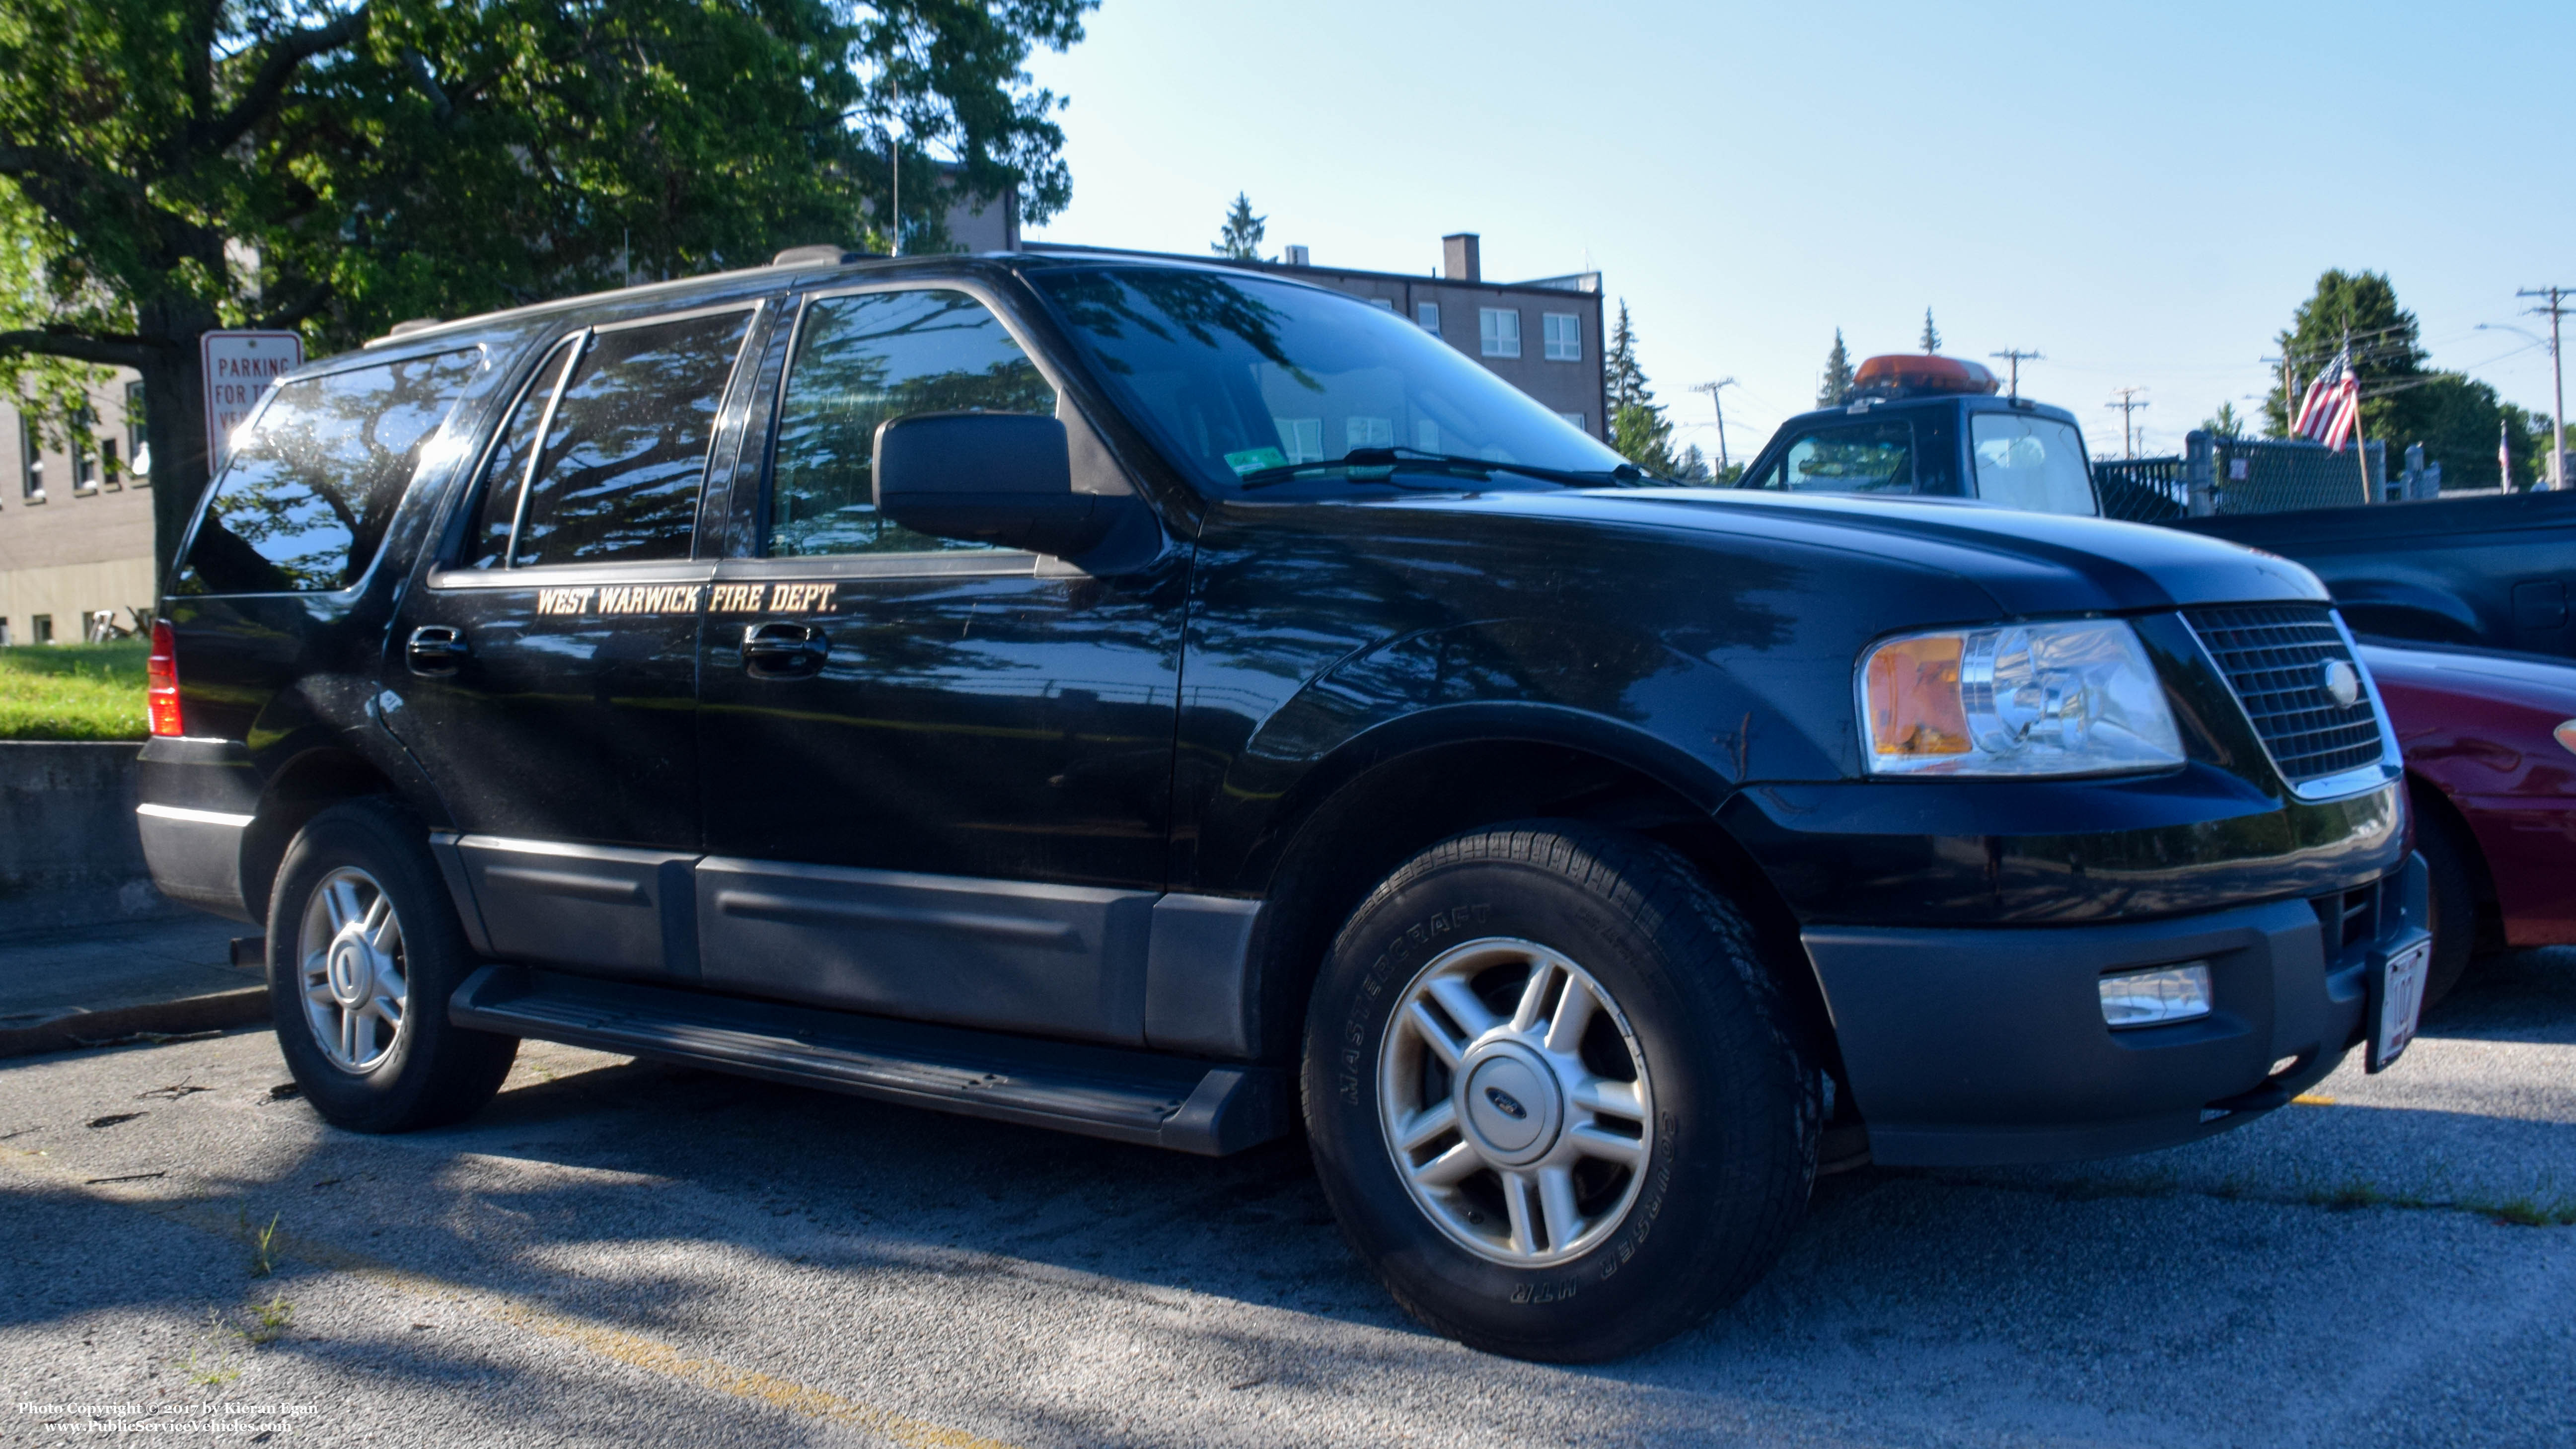 A photo  of West Warwick Fire
            Battalion 3, a 2003-2006 Ford Expedition             taken by Kieran Egan